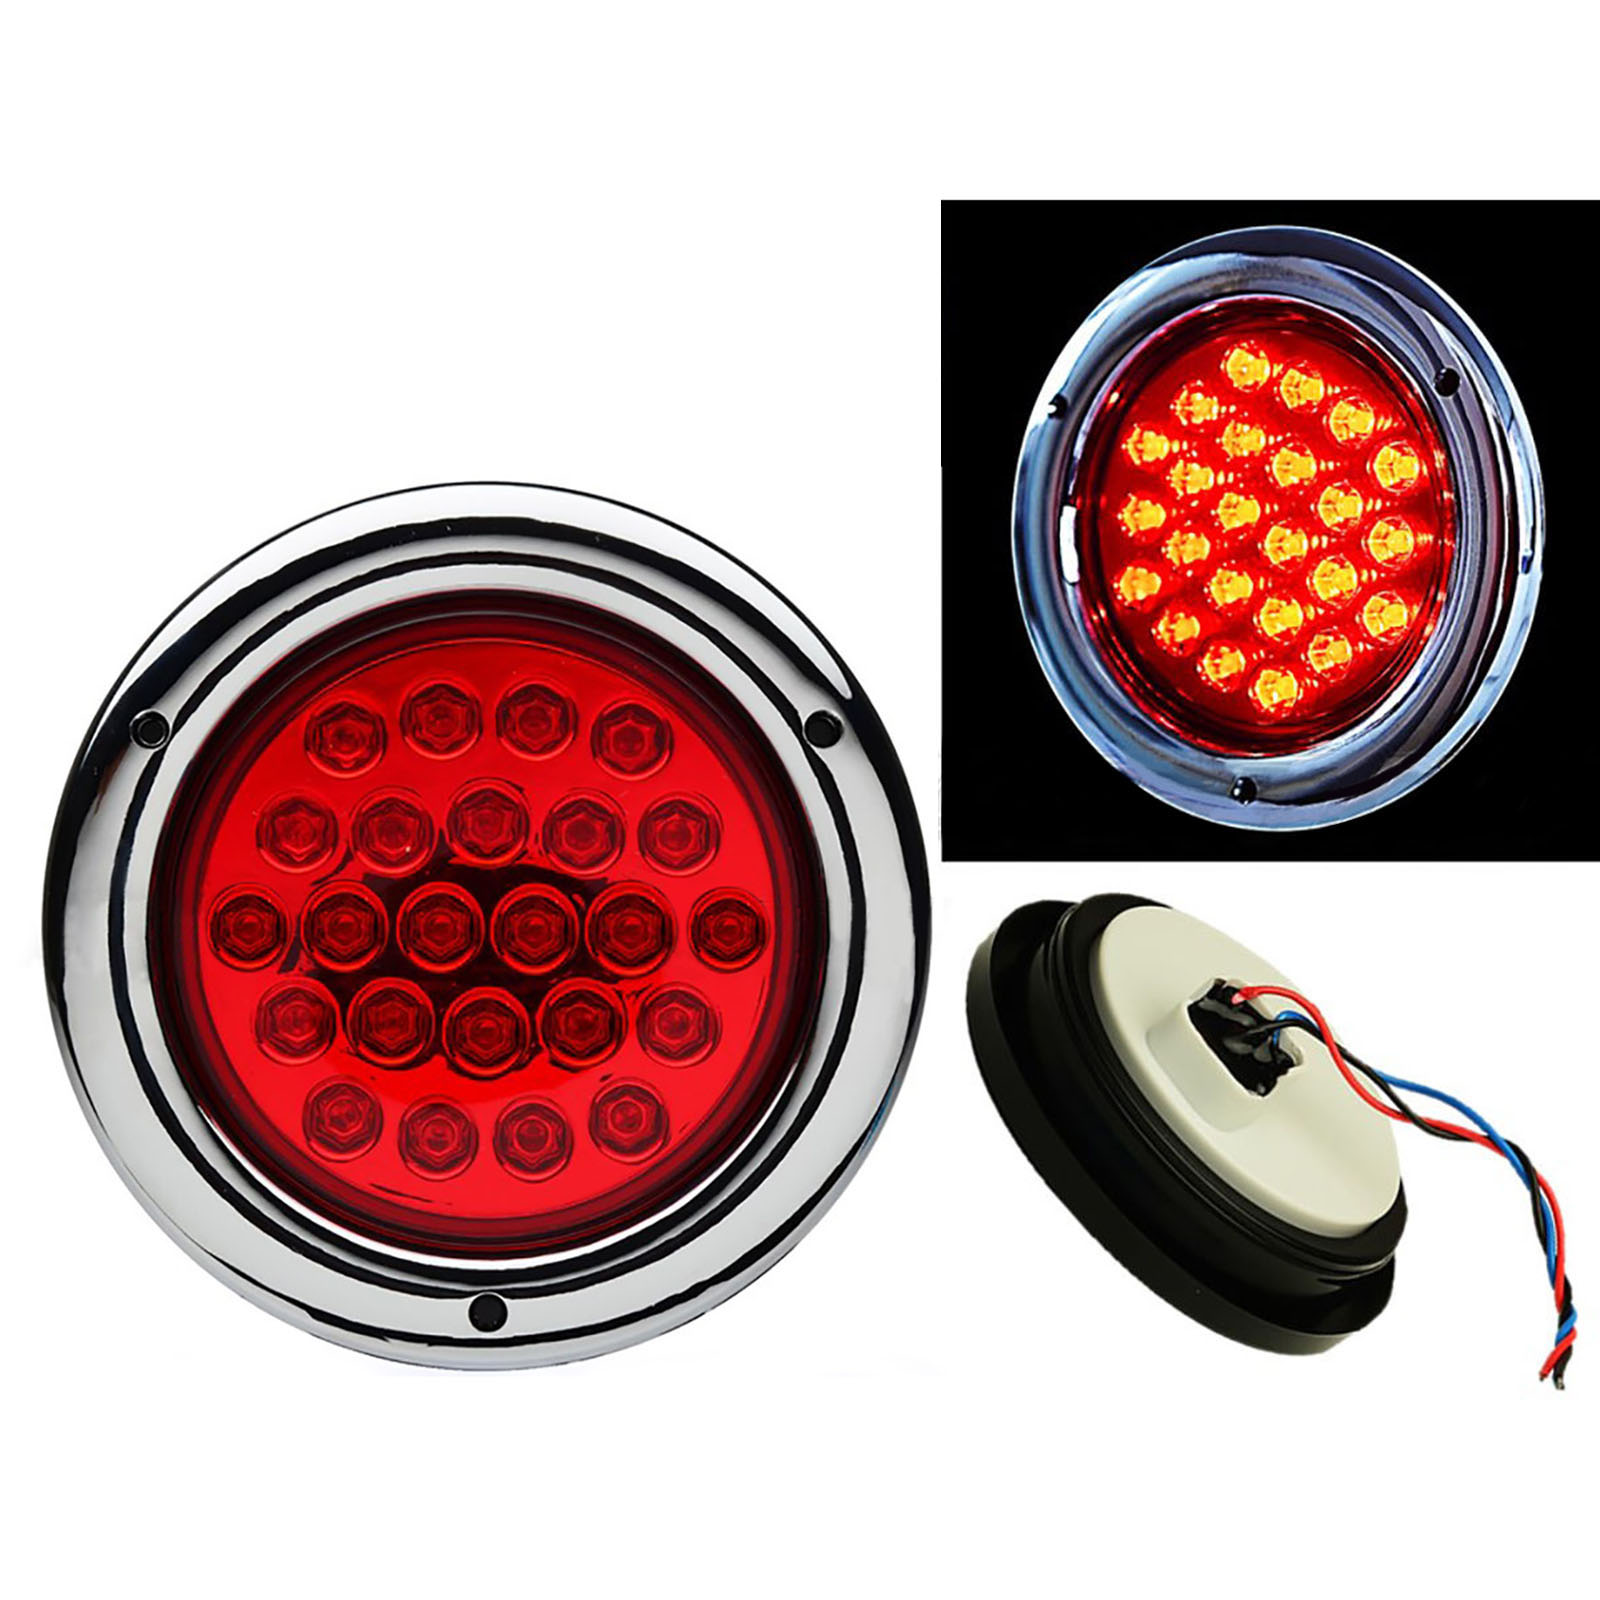 2x4" 24 LED Round+2x Square 52 LED Double Face  Red/Amber Stop Turn Tail Light